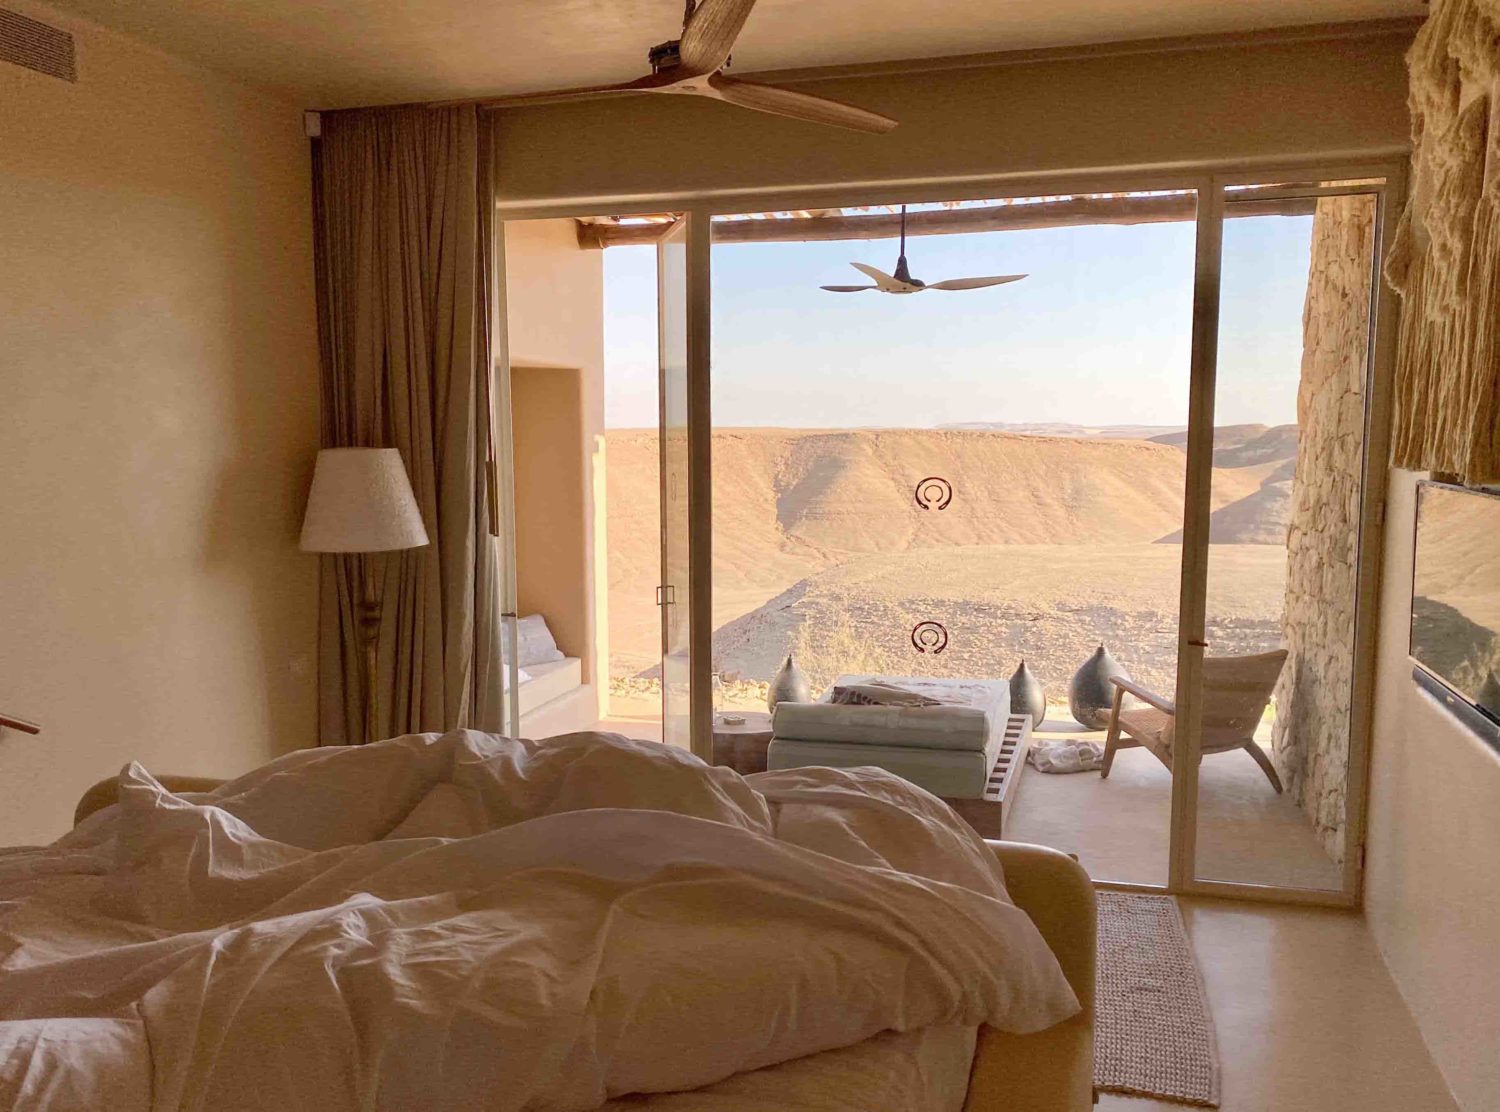 Six Senses Shaharut in Israel. The architecture blends into the environment, using materials found on-site, zero plastic on property and in-house water purification